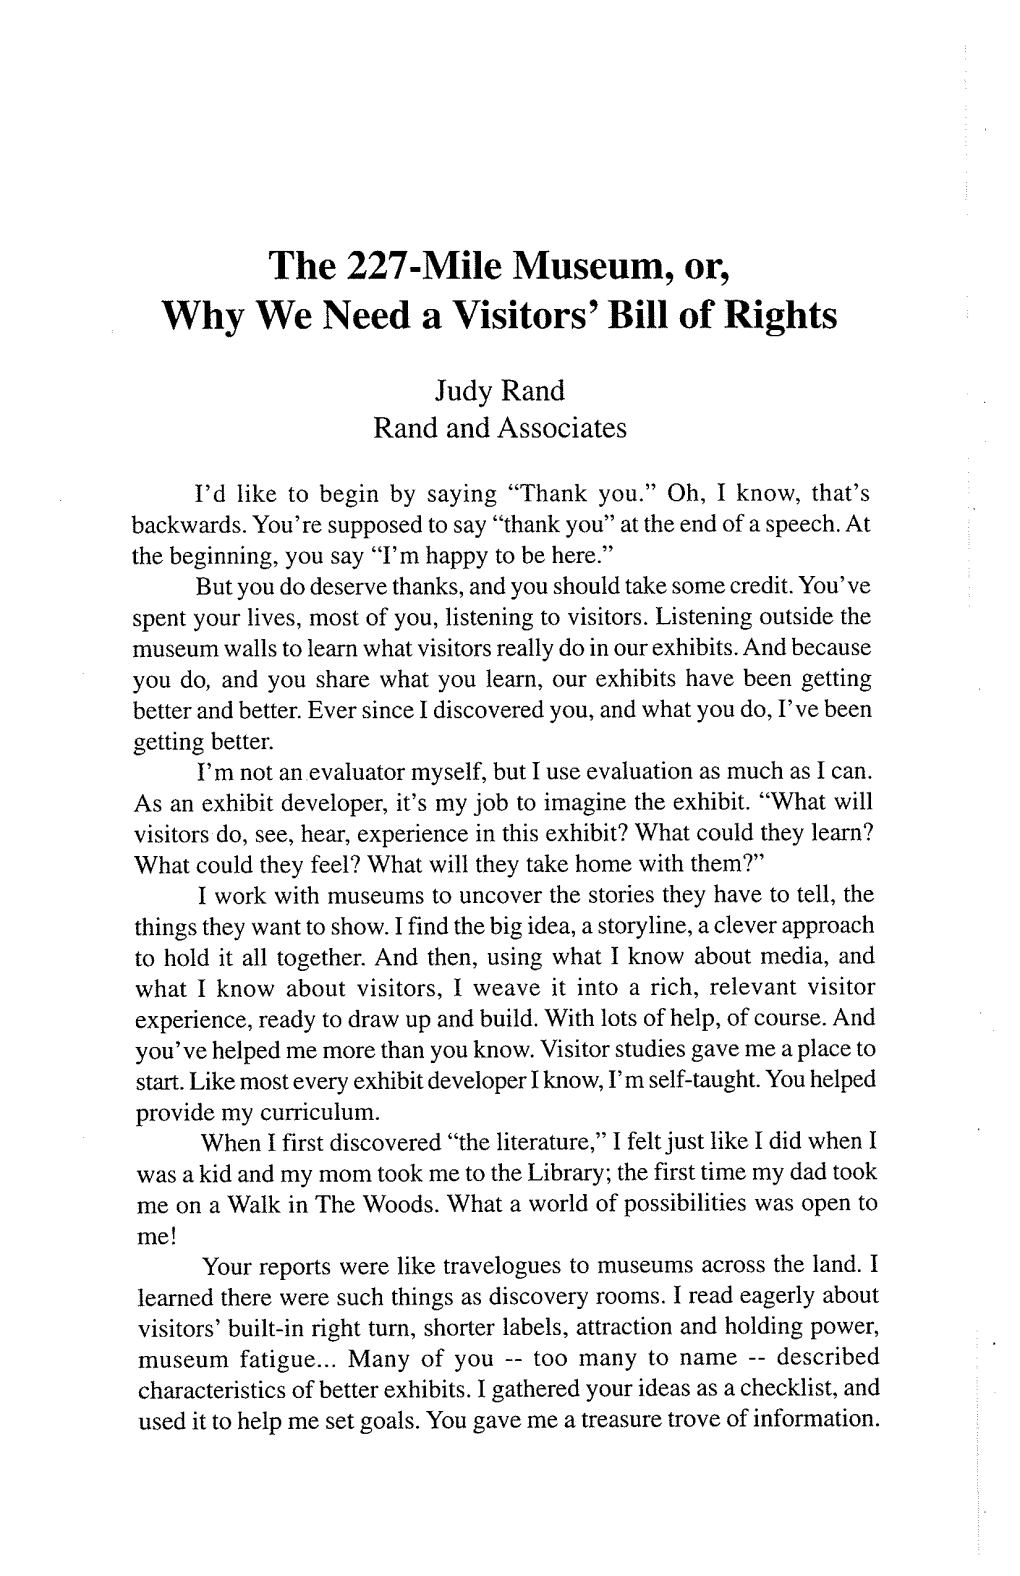 The 227-Mile Museum, Or, Why We Need a Visitors' Bill of Rights